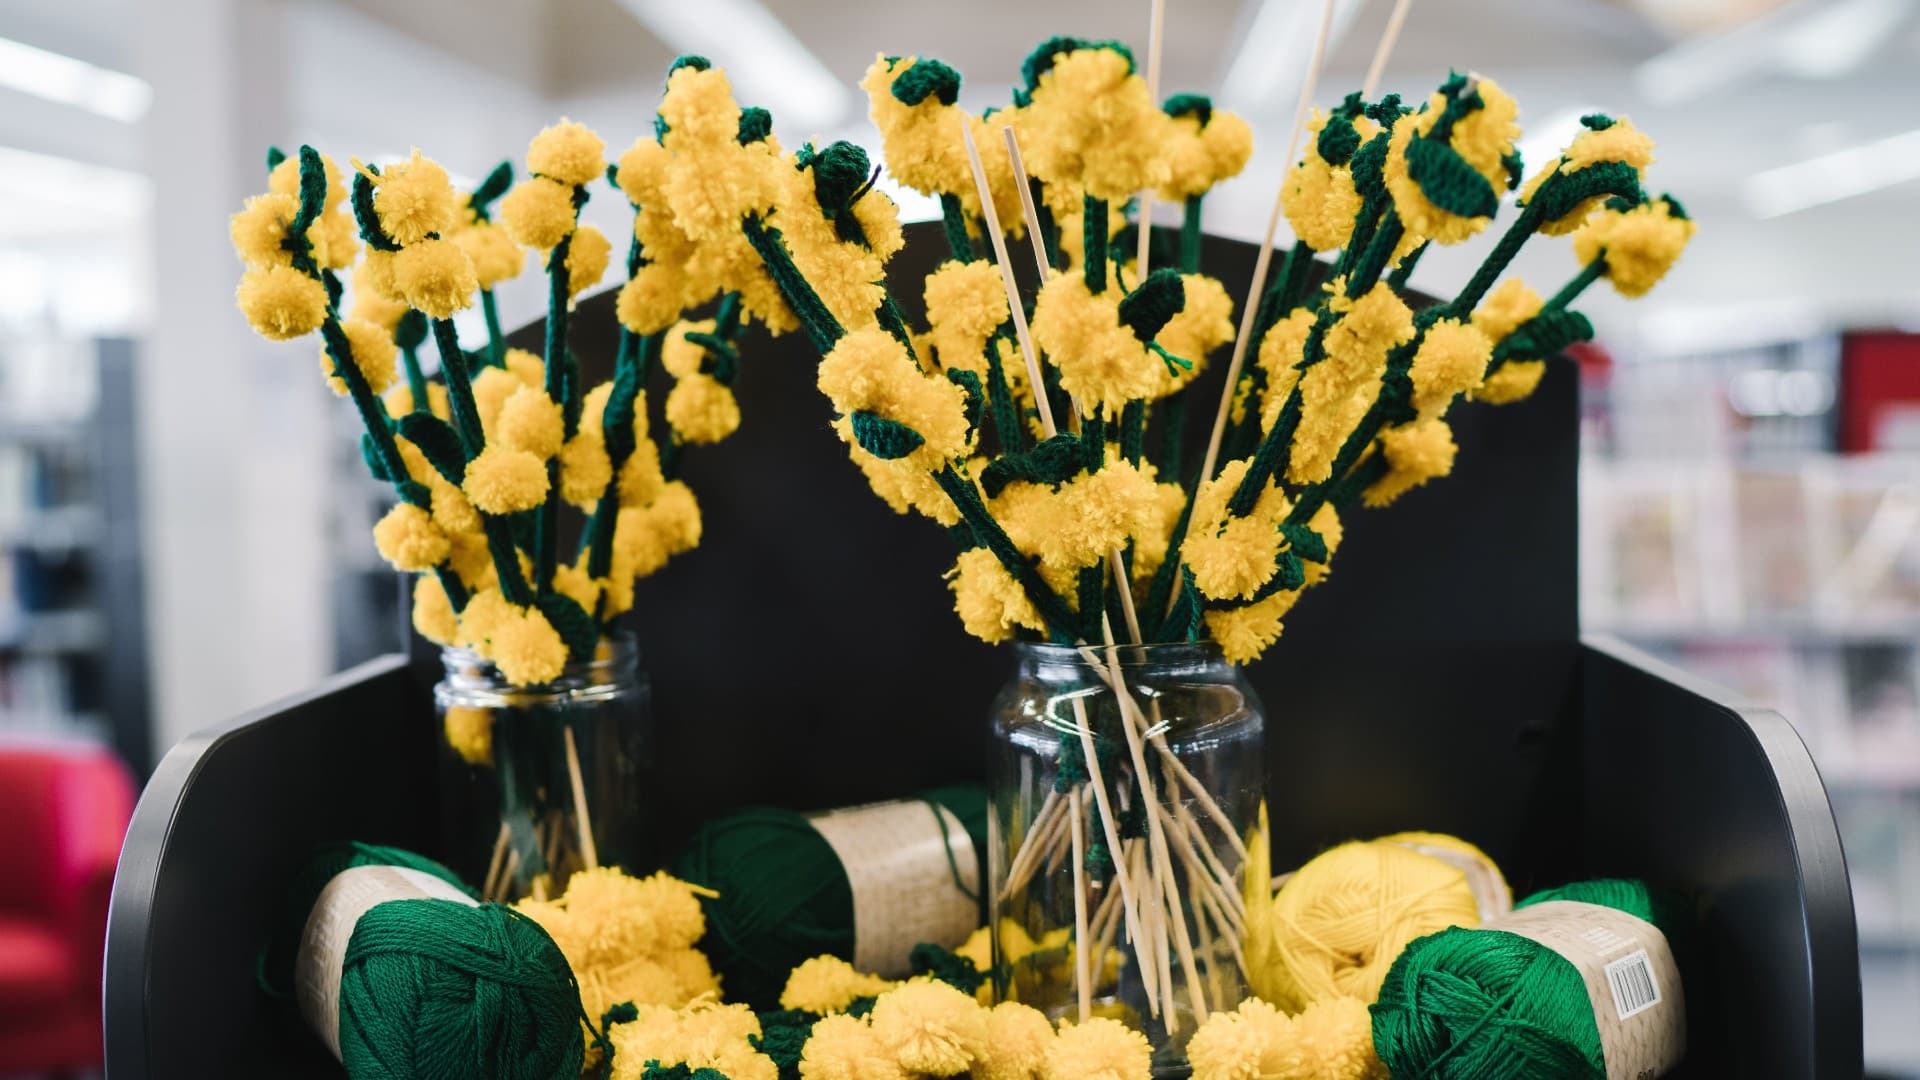 The knitted wattle flowers that will be created as part of the Wattle Walk. Photo: Sunbird Photography